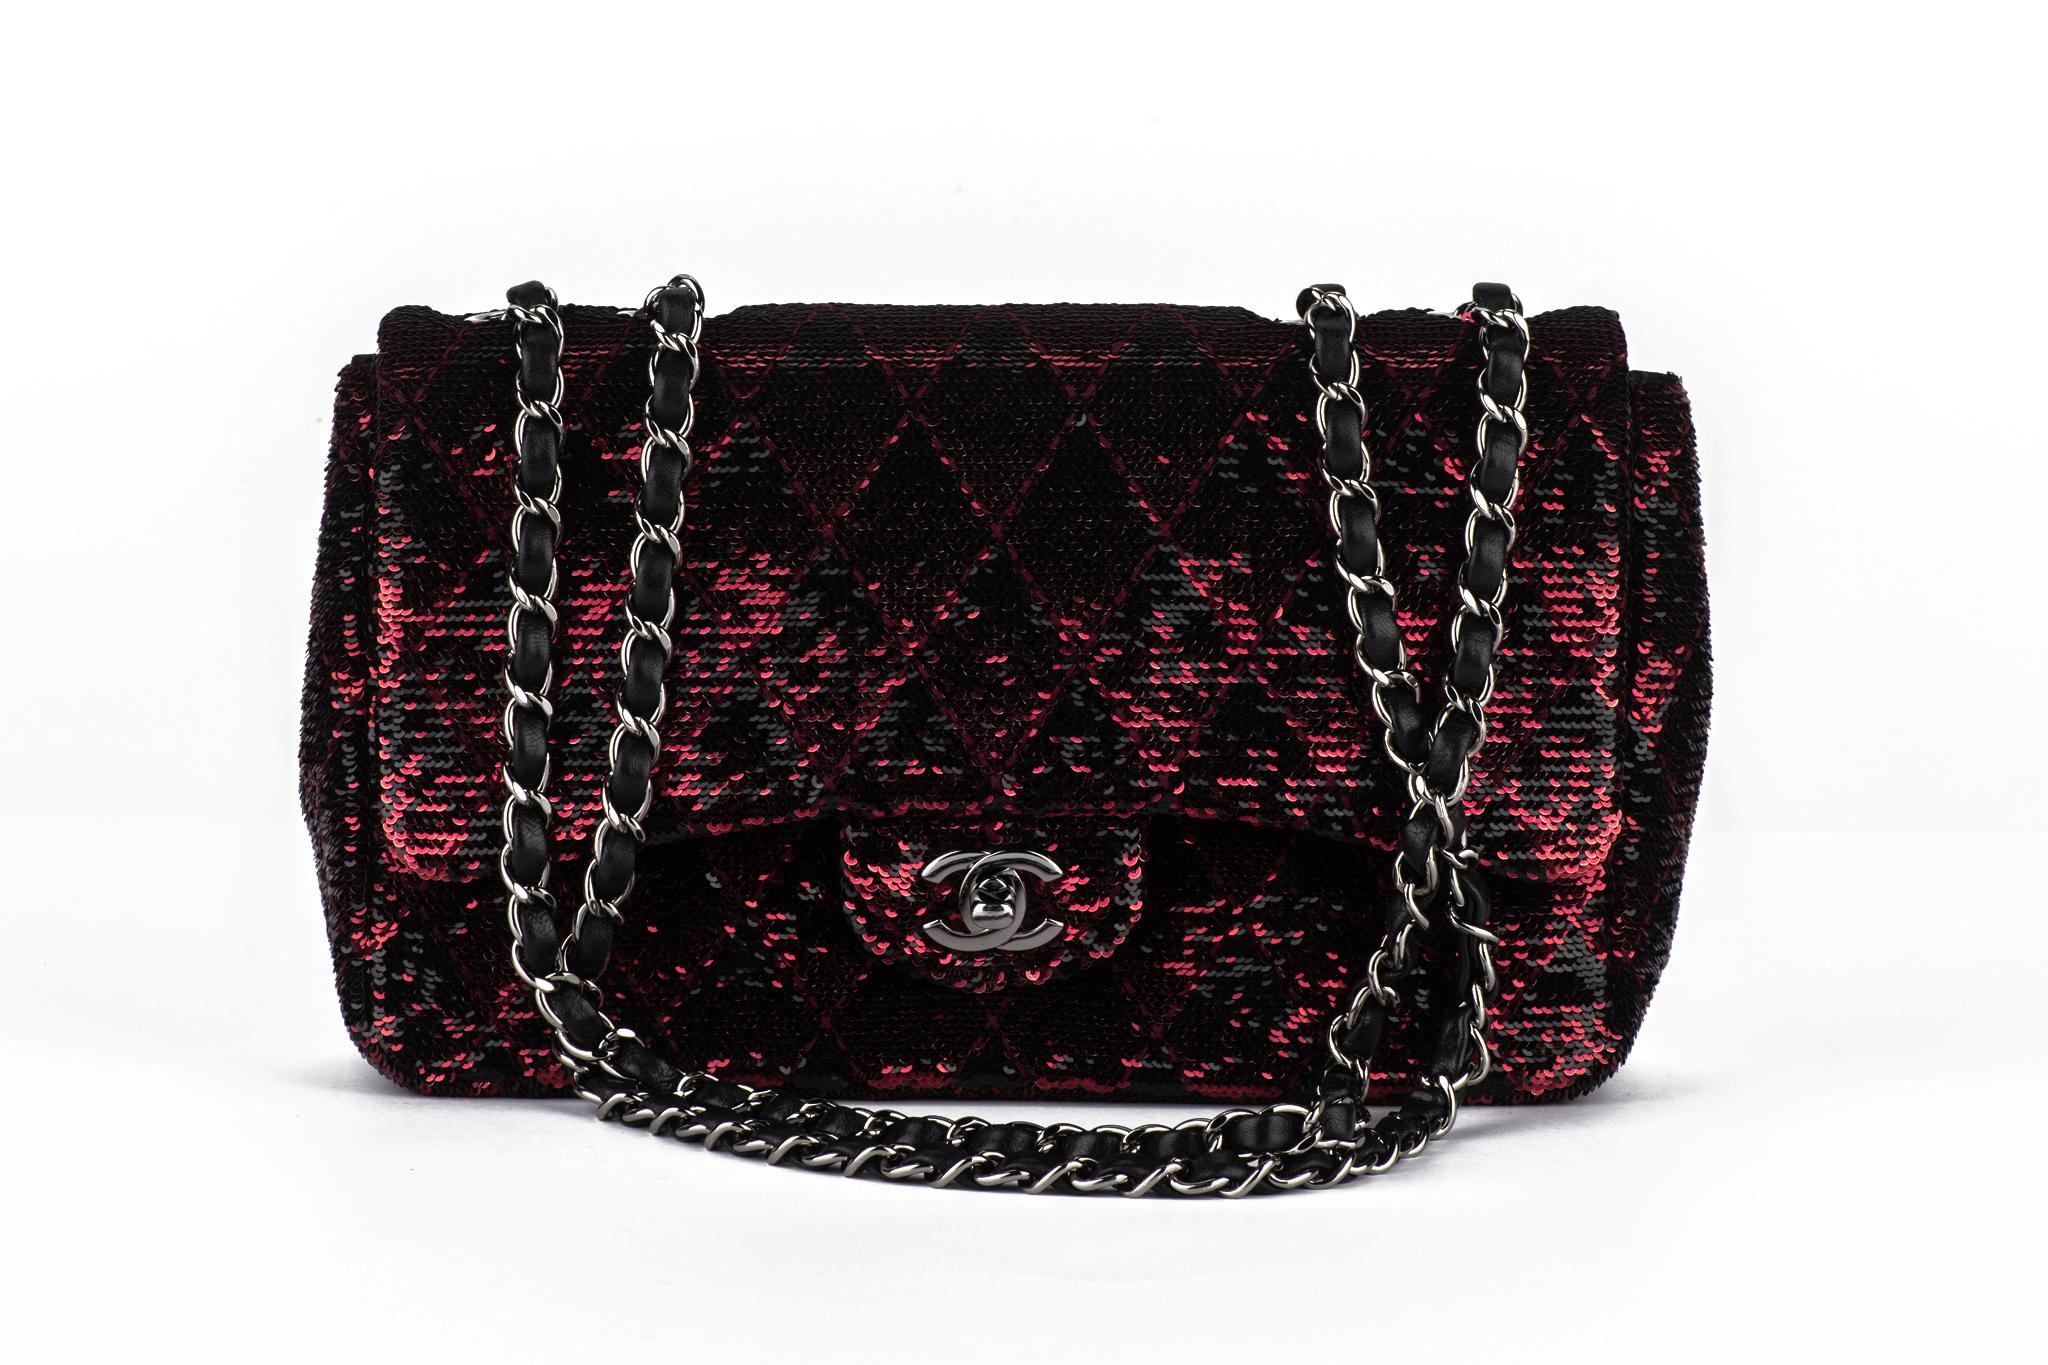 Chanel authentic timeless single flap in black leather and red sequins. Silver tone hardware. 
Collection 24. Handle drop 11.5